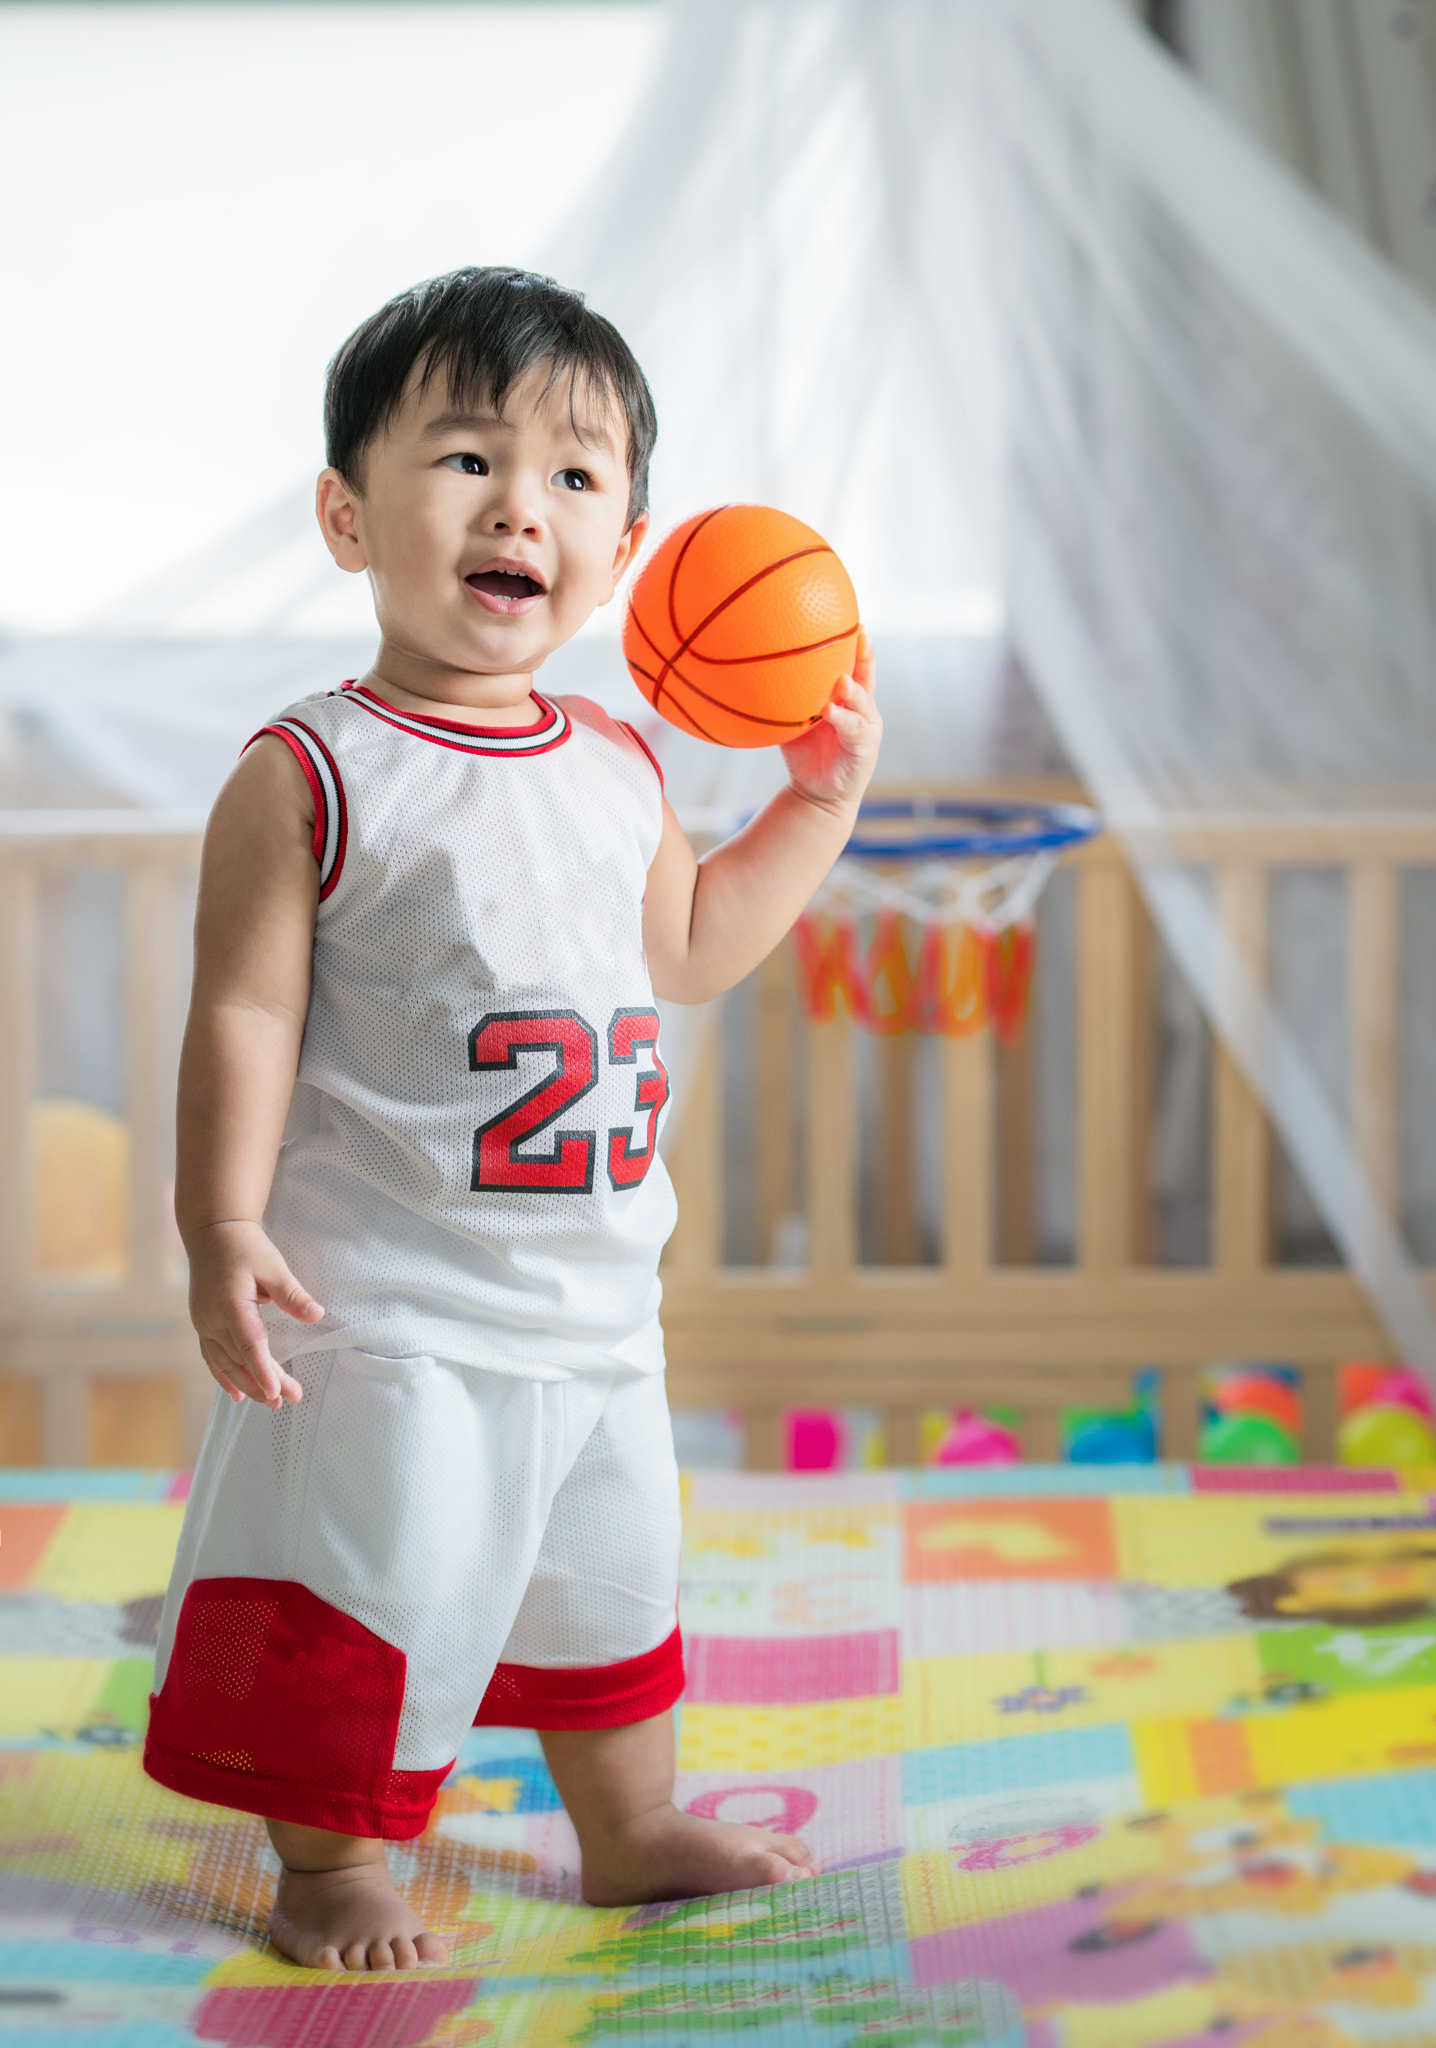 Baby with ball in basketball uniform